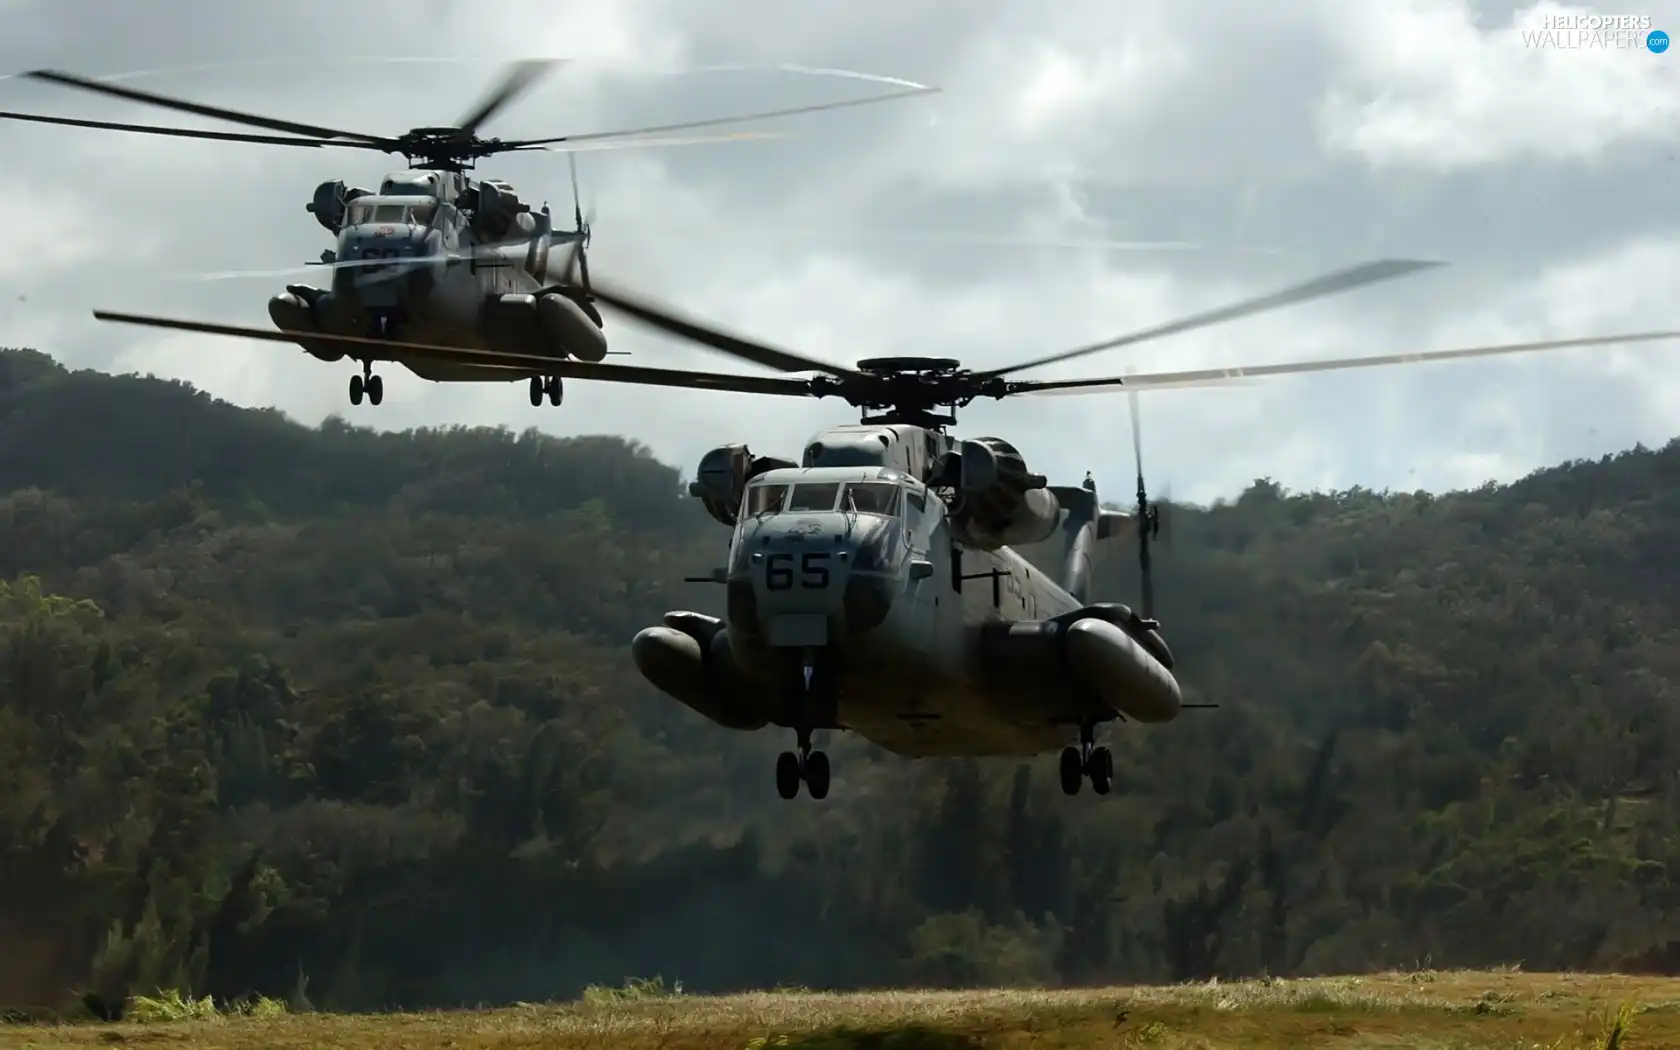 Super Stallion, Helicopters, airstrip